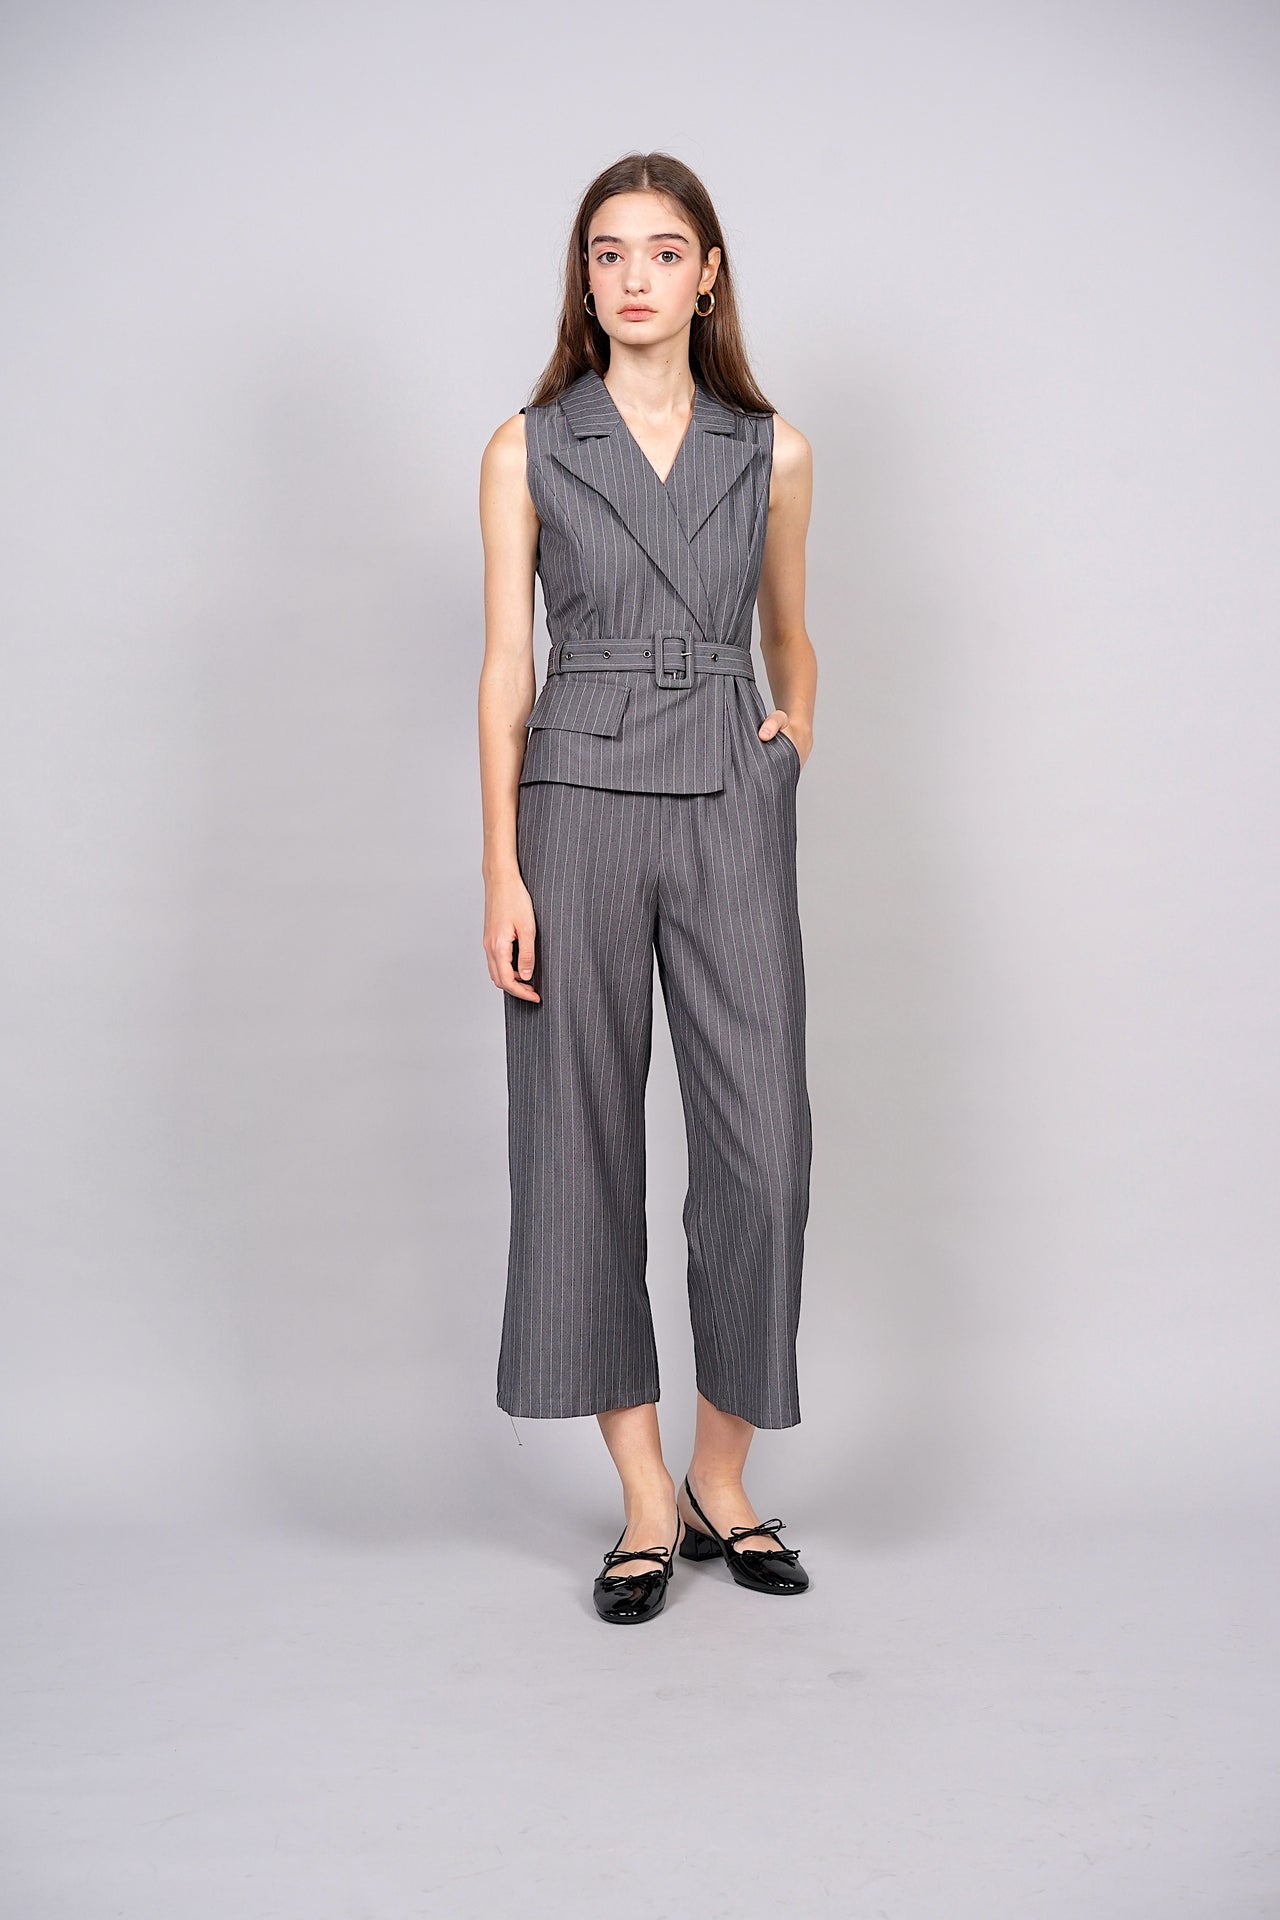 Herald Buckled Jumpsuit in Heather Grey Stripes